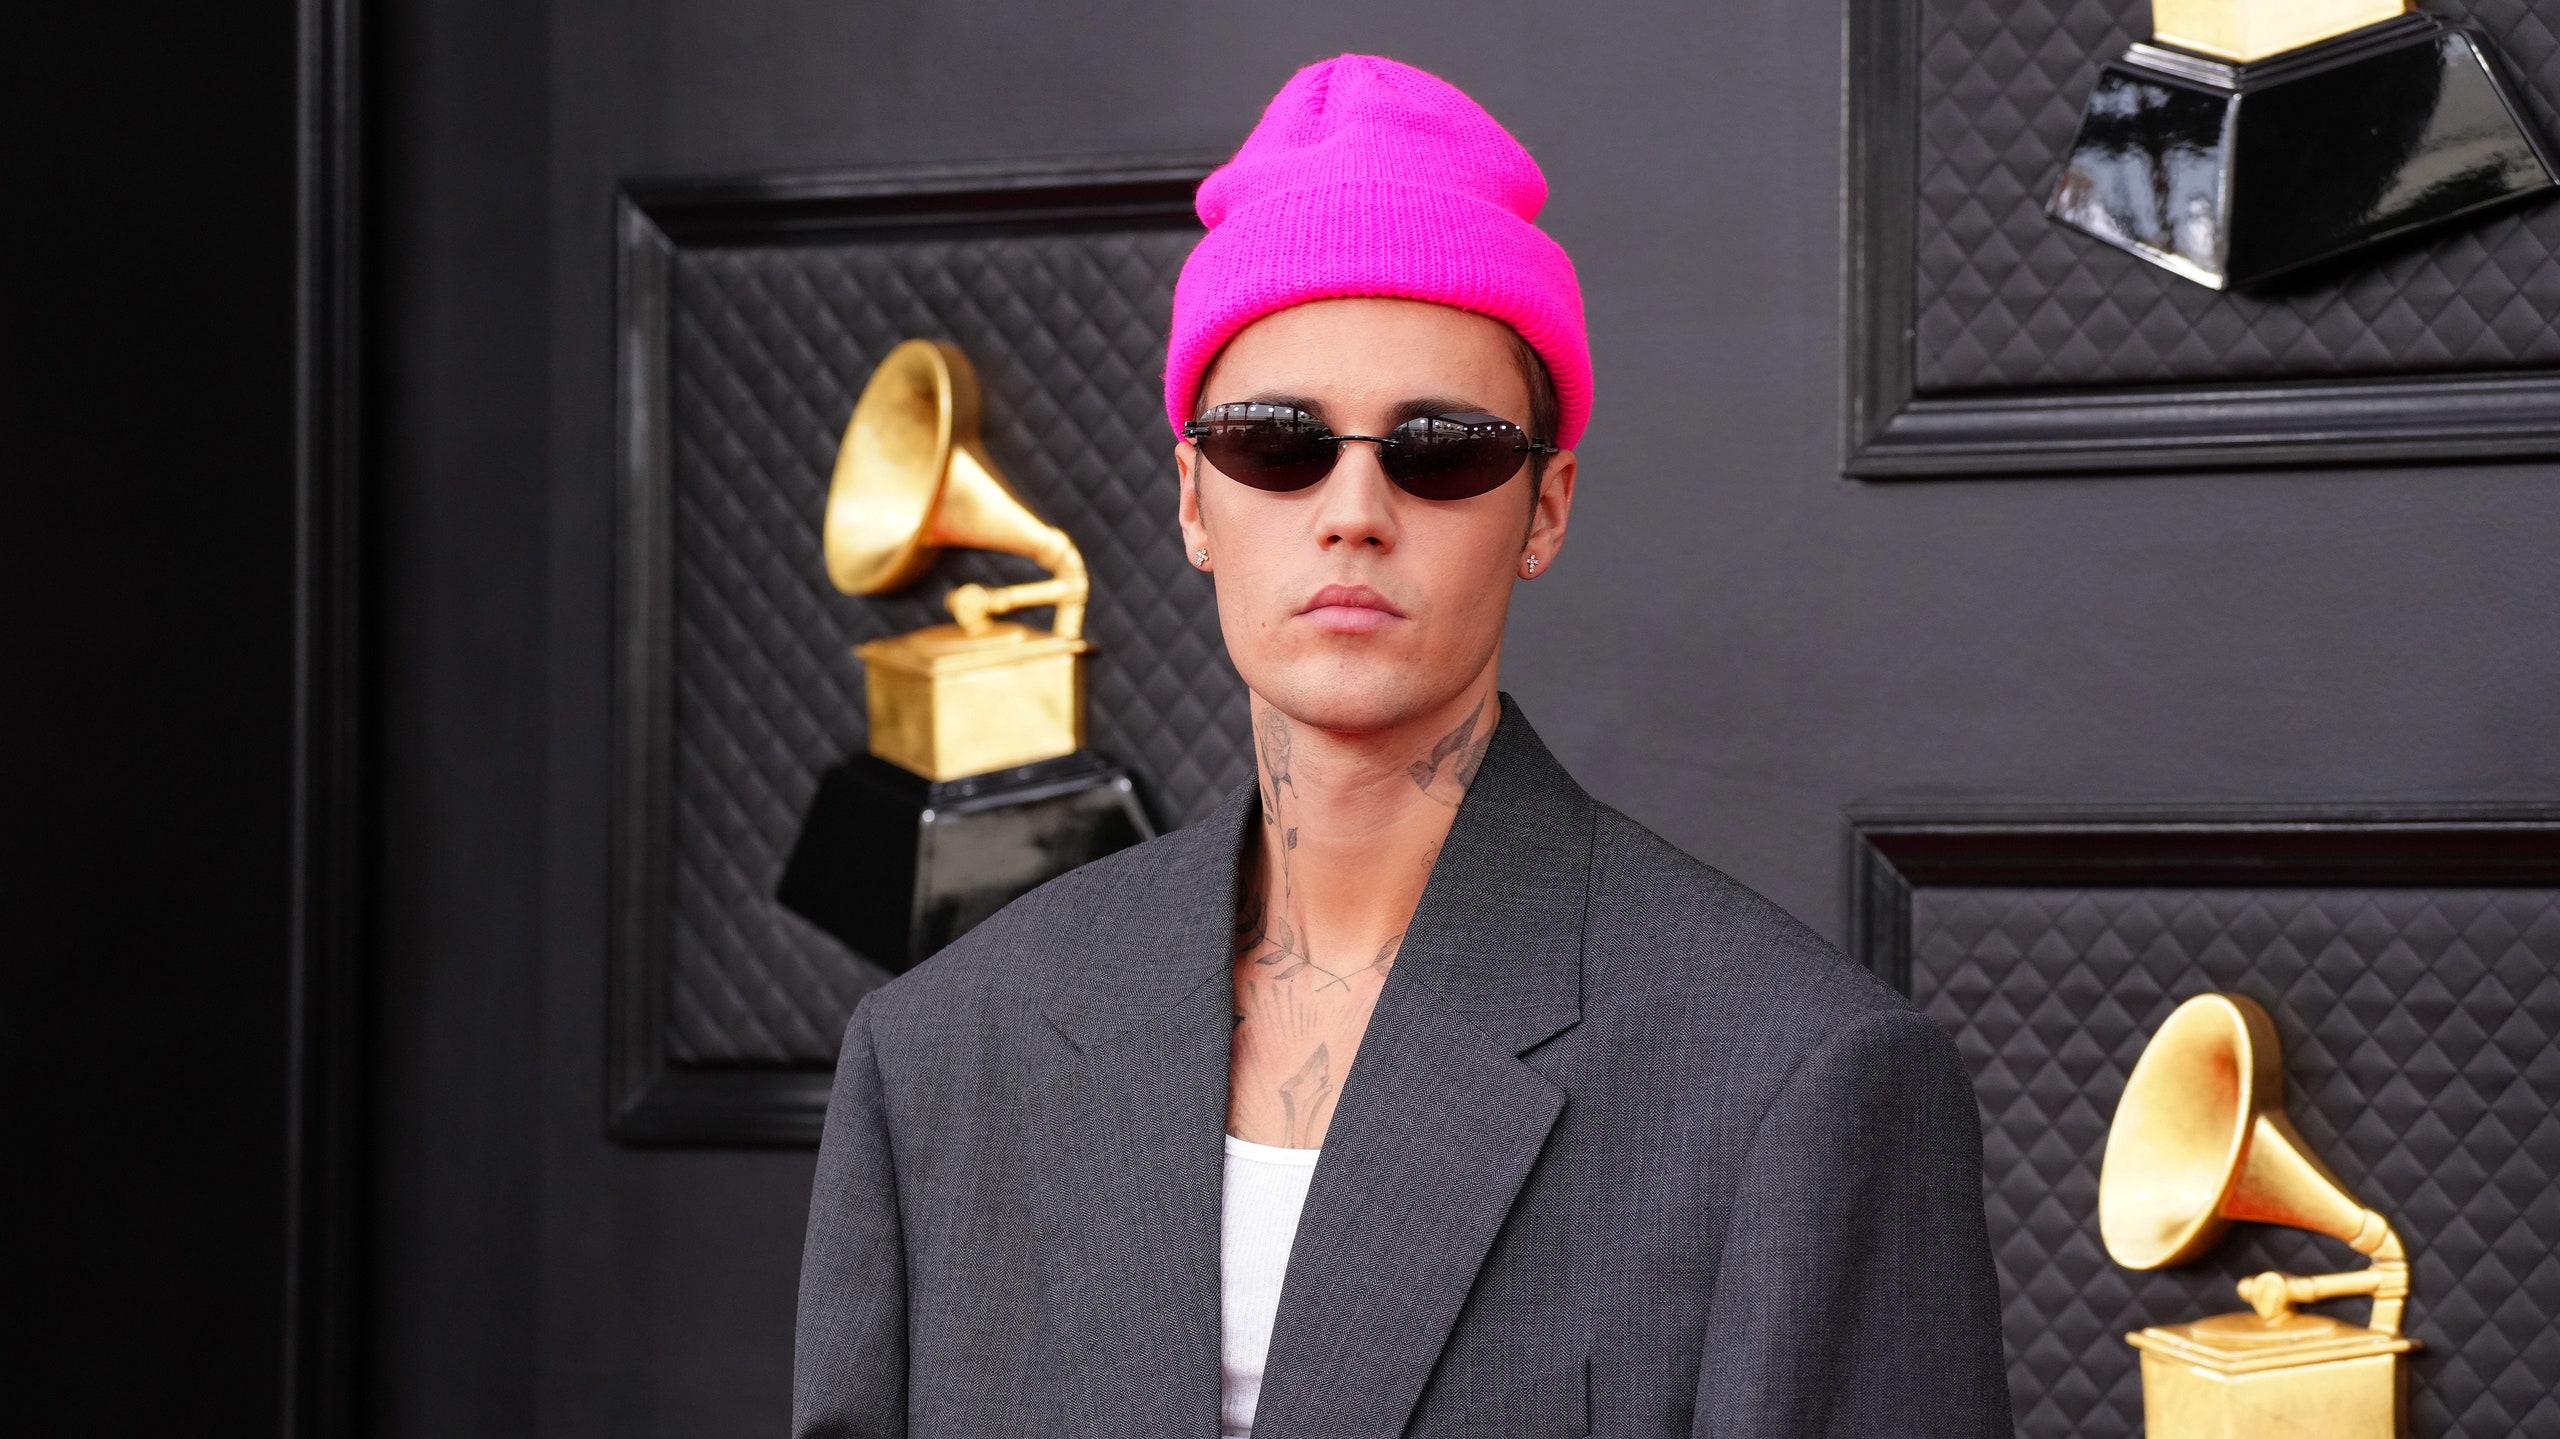 Justin Bieber S Massive Grammys Suit Took The Big Fit Literally Gq